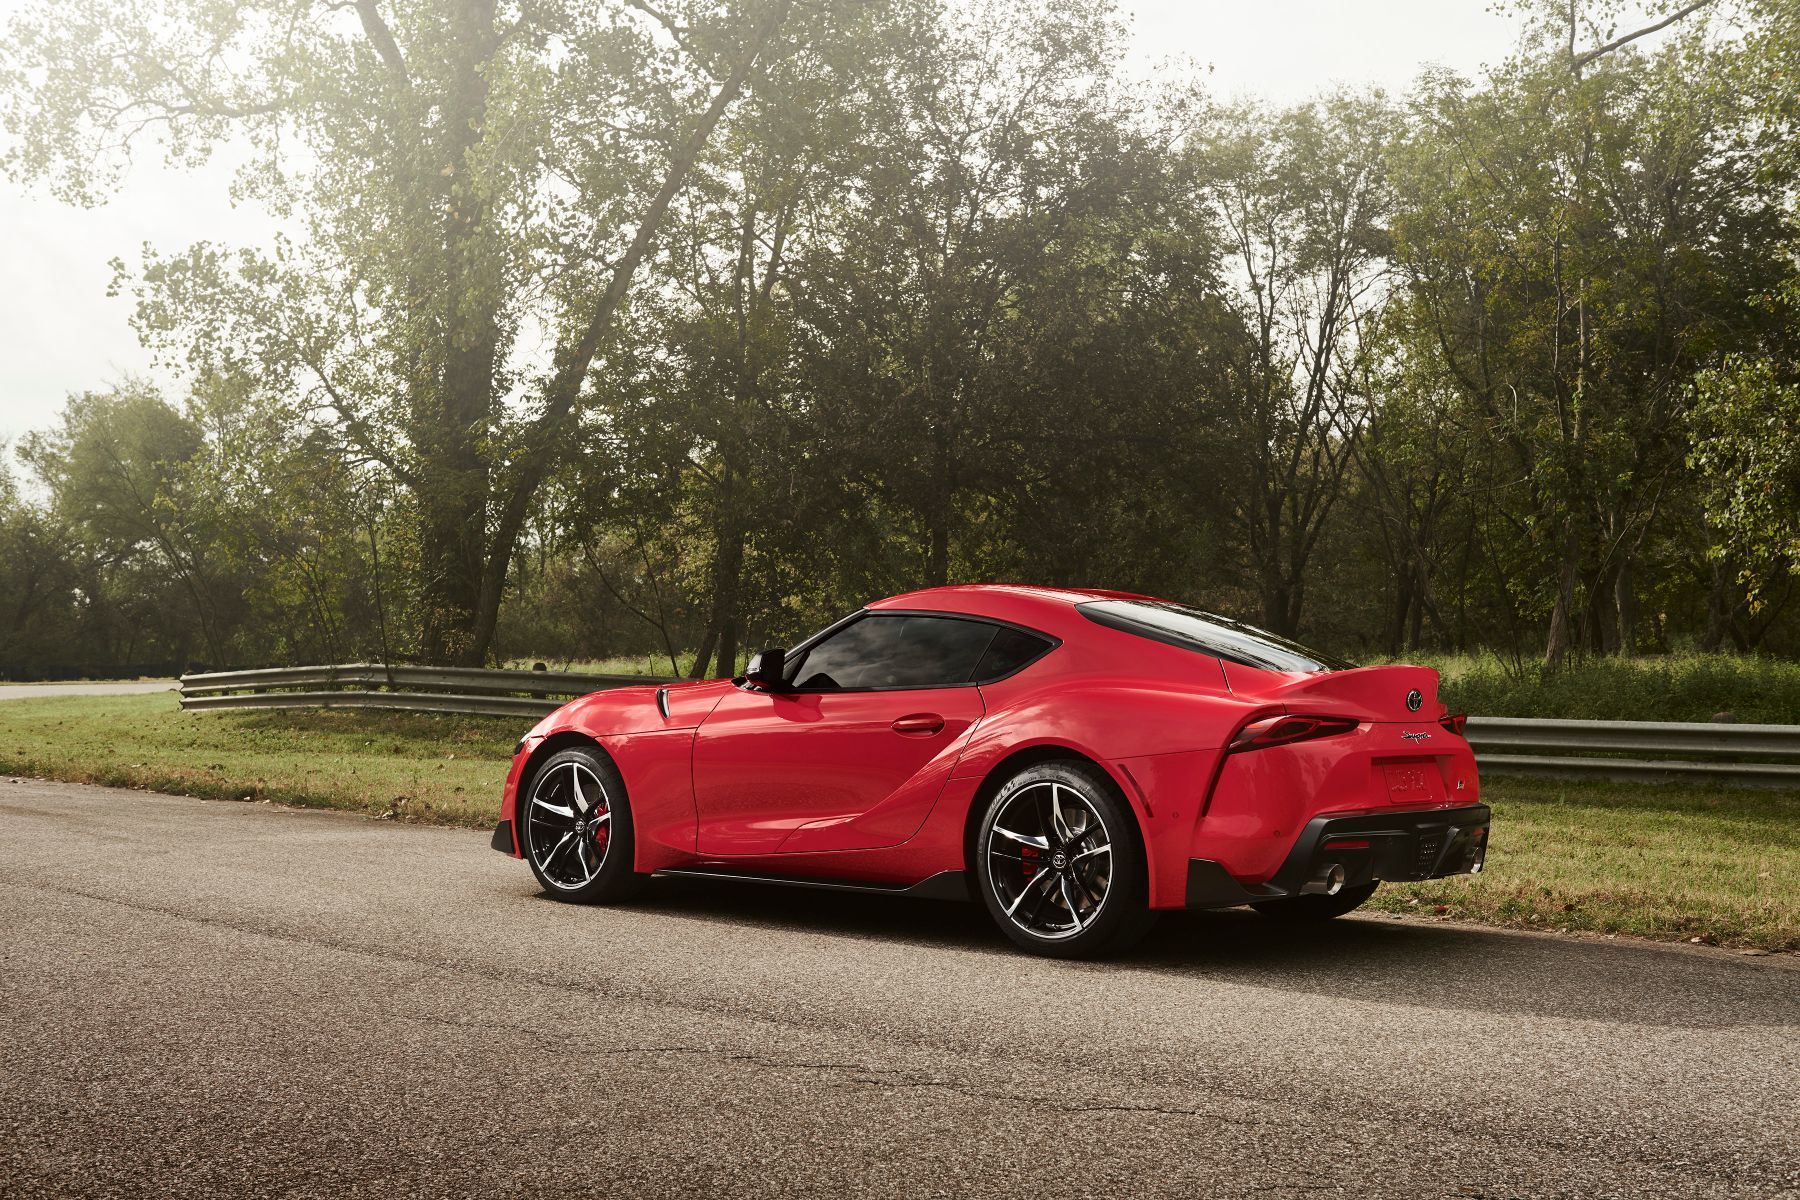 The new 2020 Toyota Supra GR, arriving soon at Longueuil Toyota